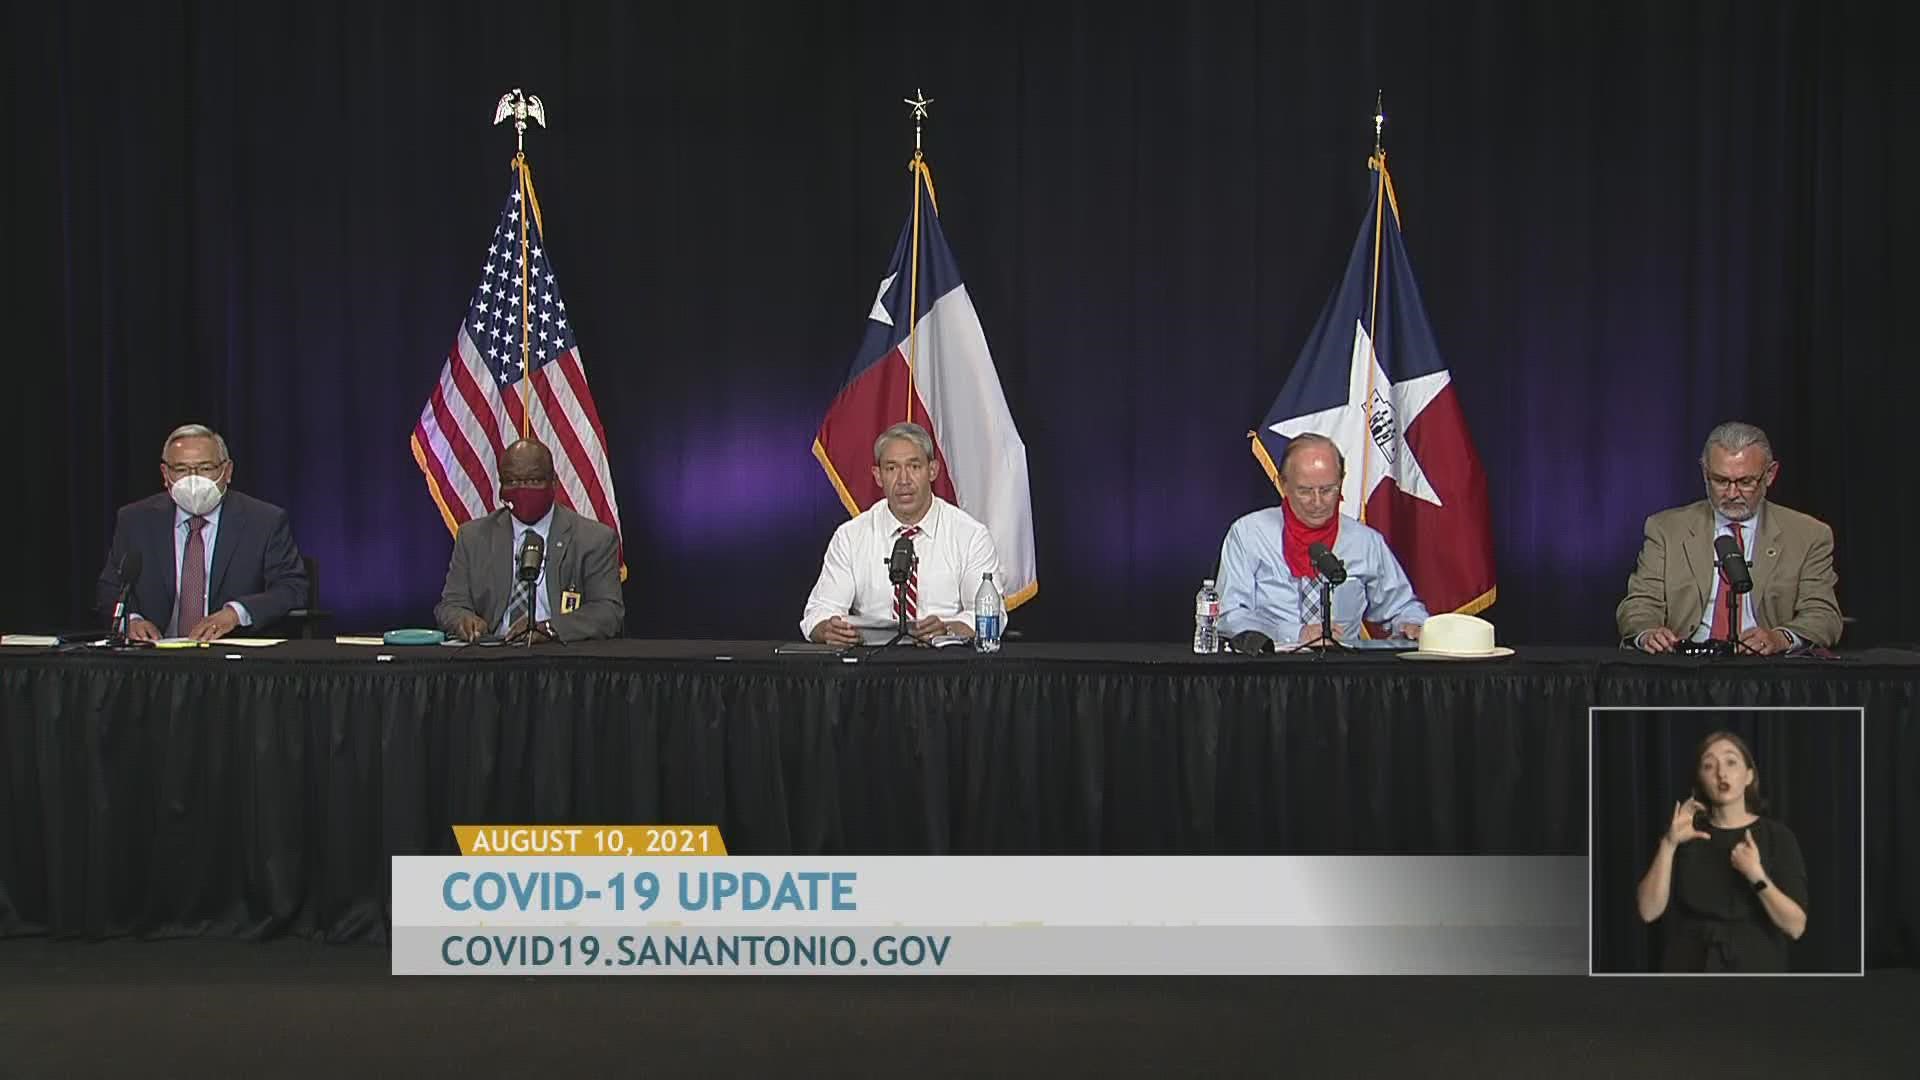 The City of San Antonio and Bexar County gave updates on the coronavirus in the county for August 10, 2021.